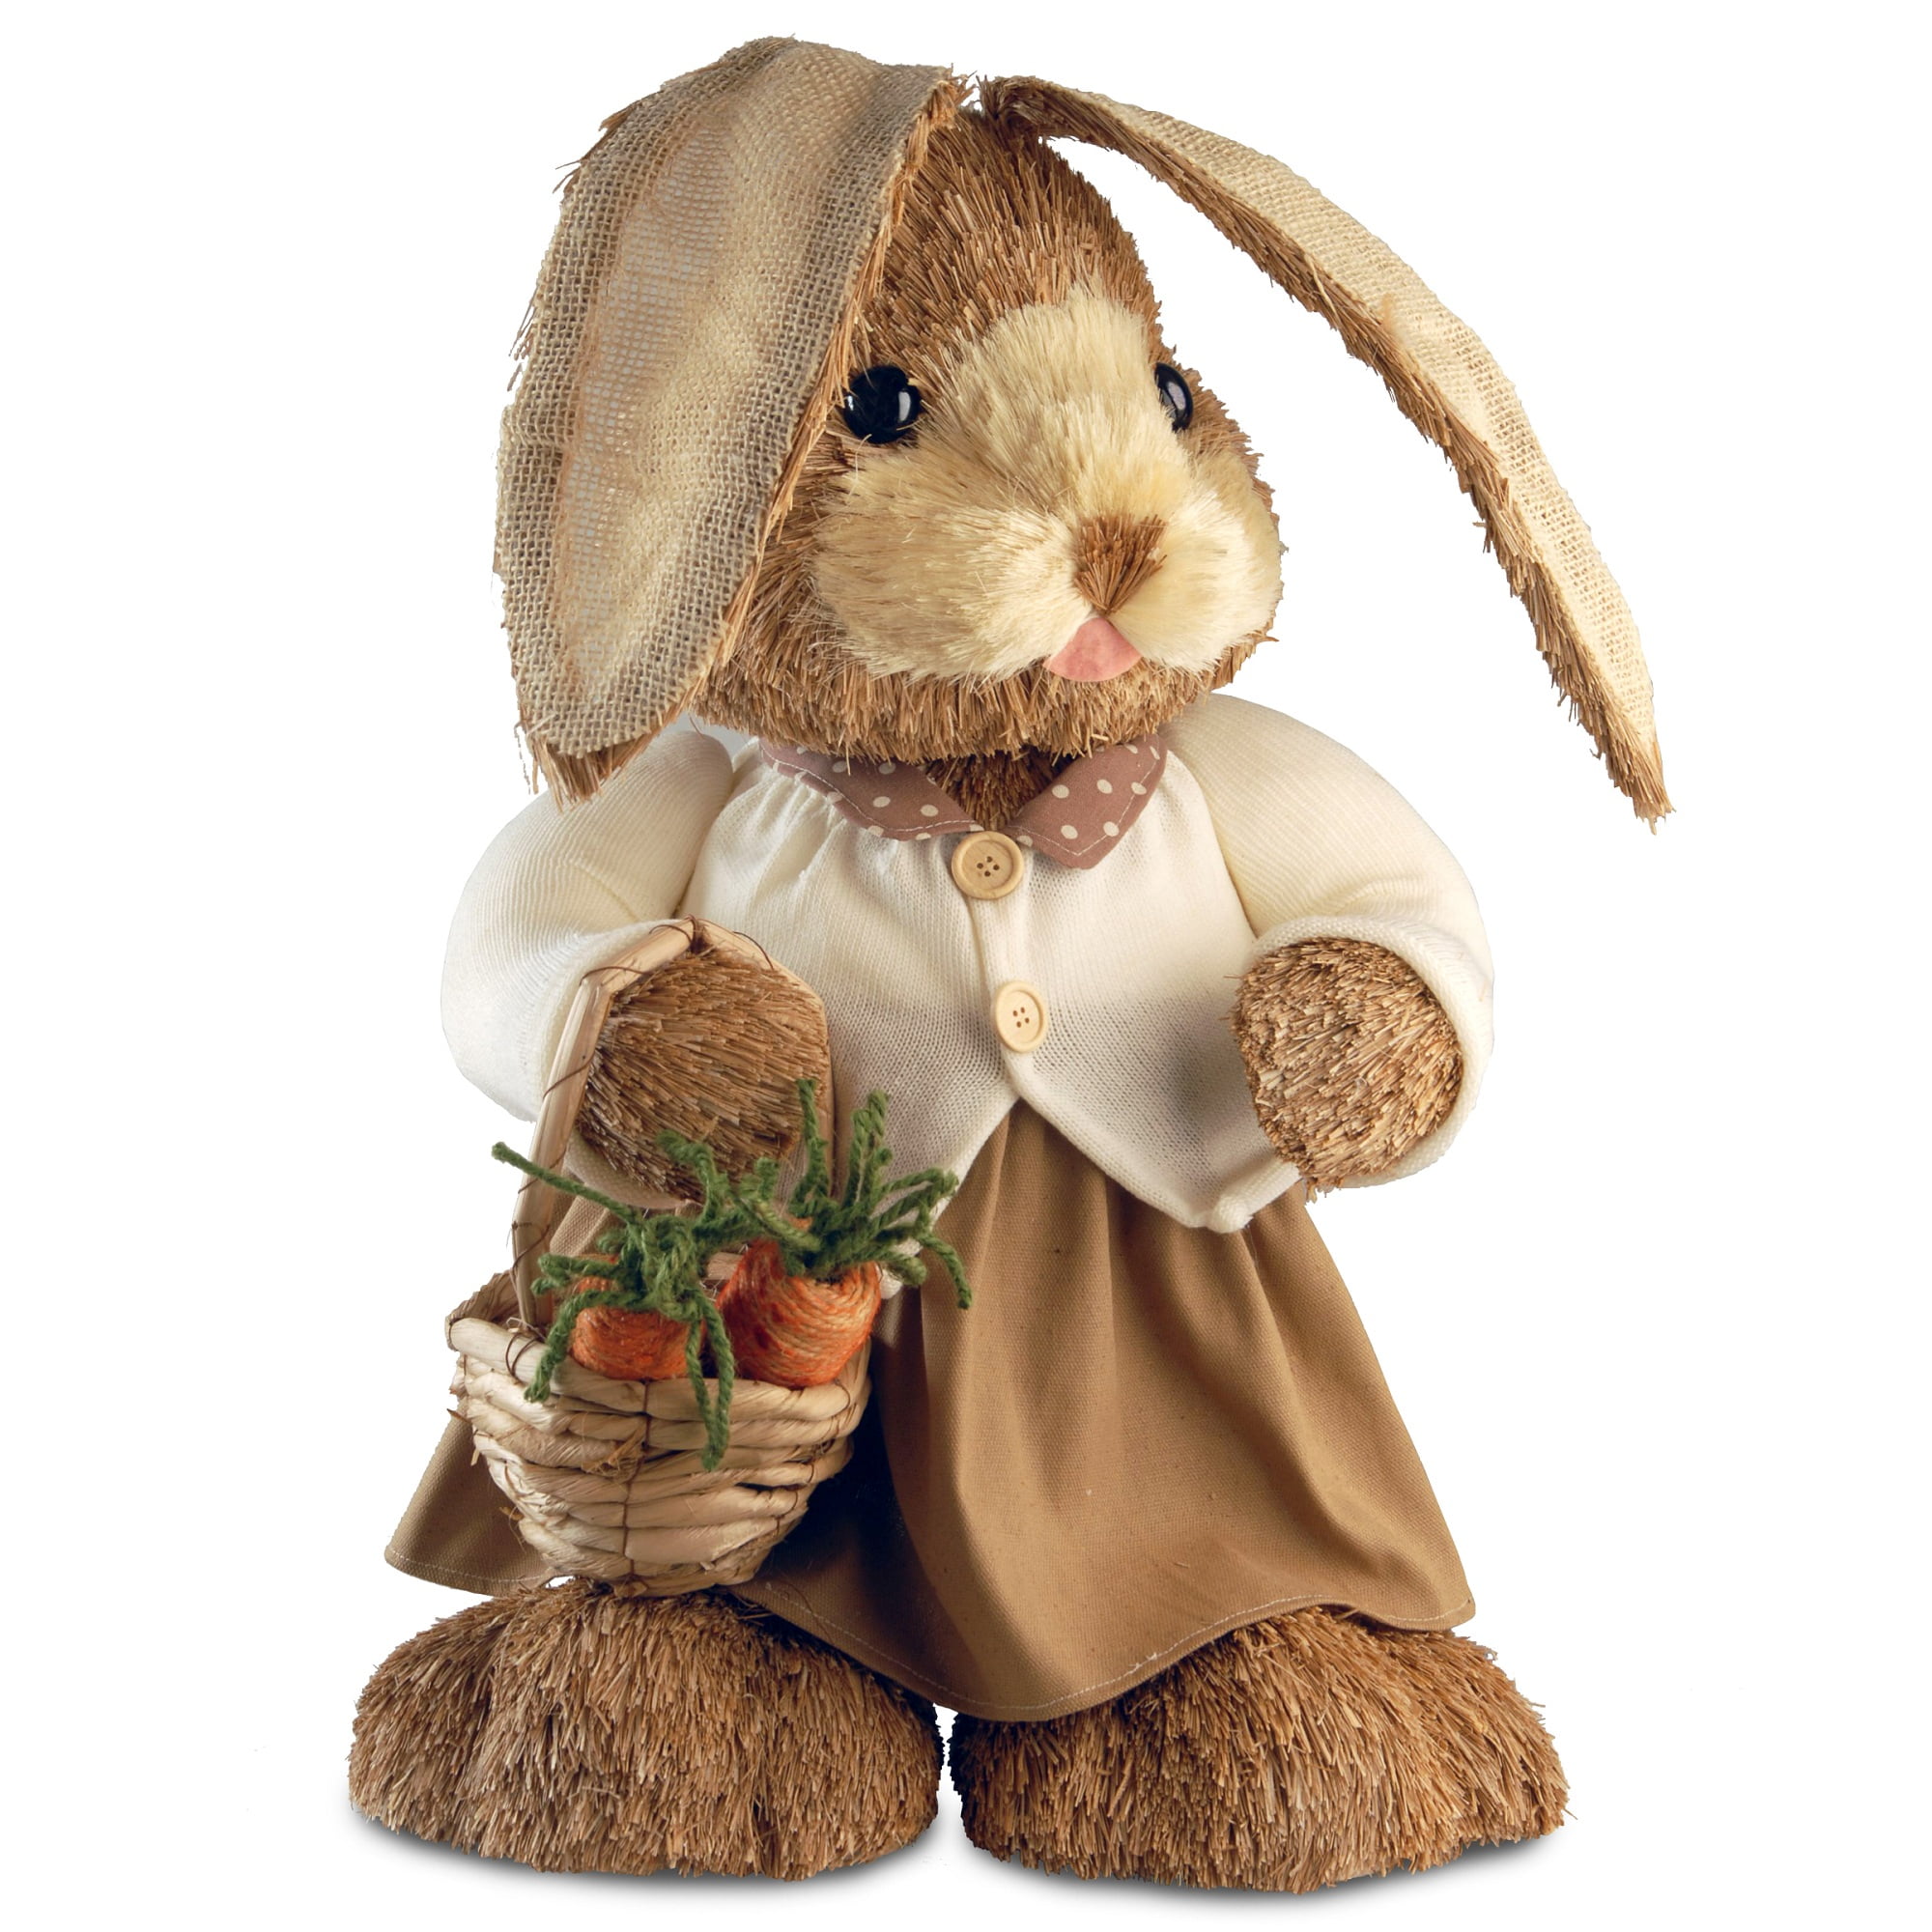 36” Brown Floppy Ear Easter Bunny Rabbit Carrying Carrots